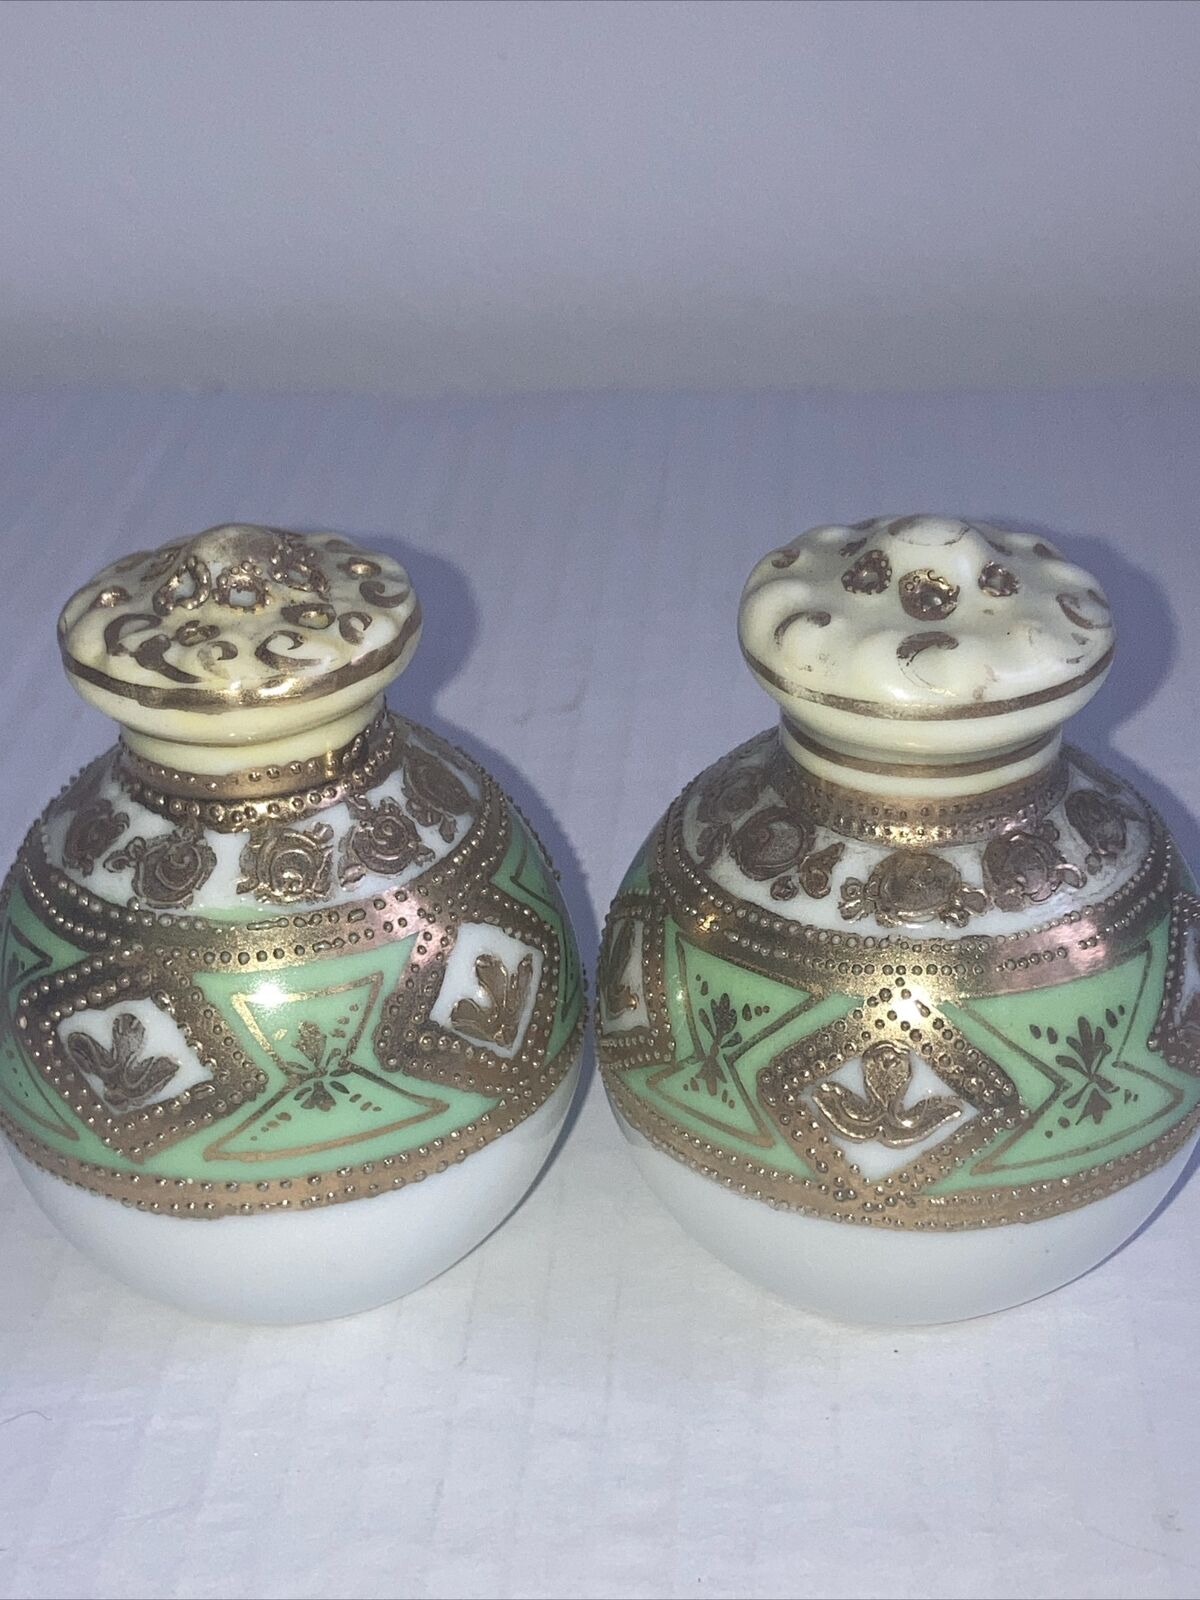 Antique Pair Of Powder Shakers Or Salt & Pepper shakers